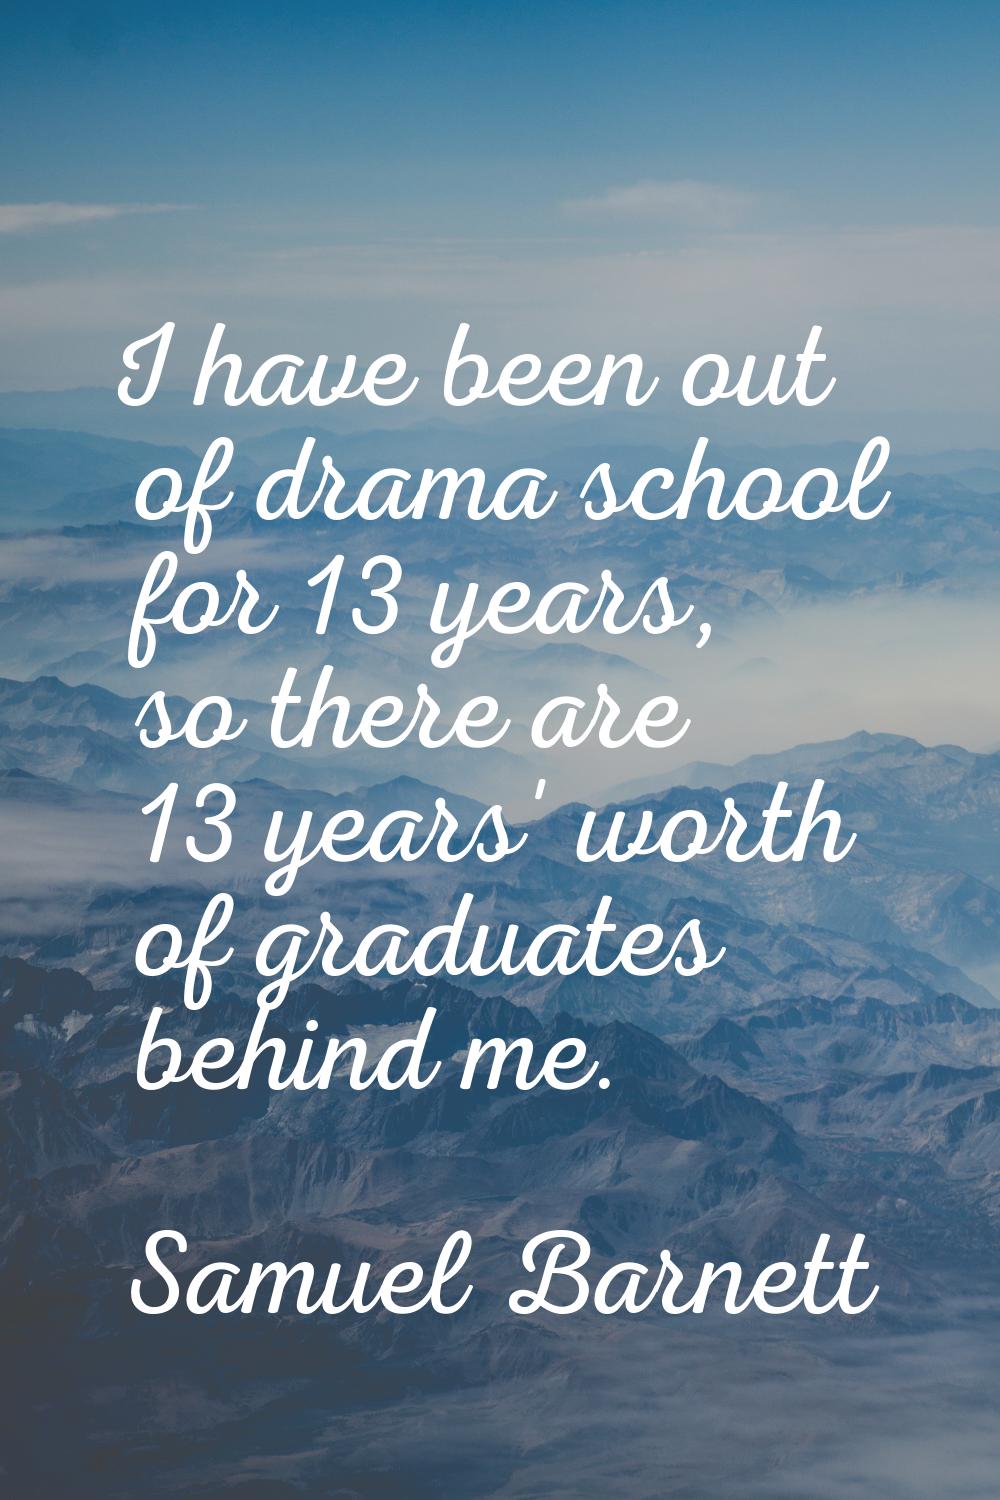 I have been out of drama school for 13 years, so there are 13 years' worth of graduates behind me.